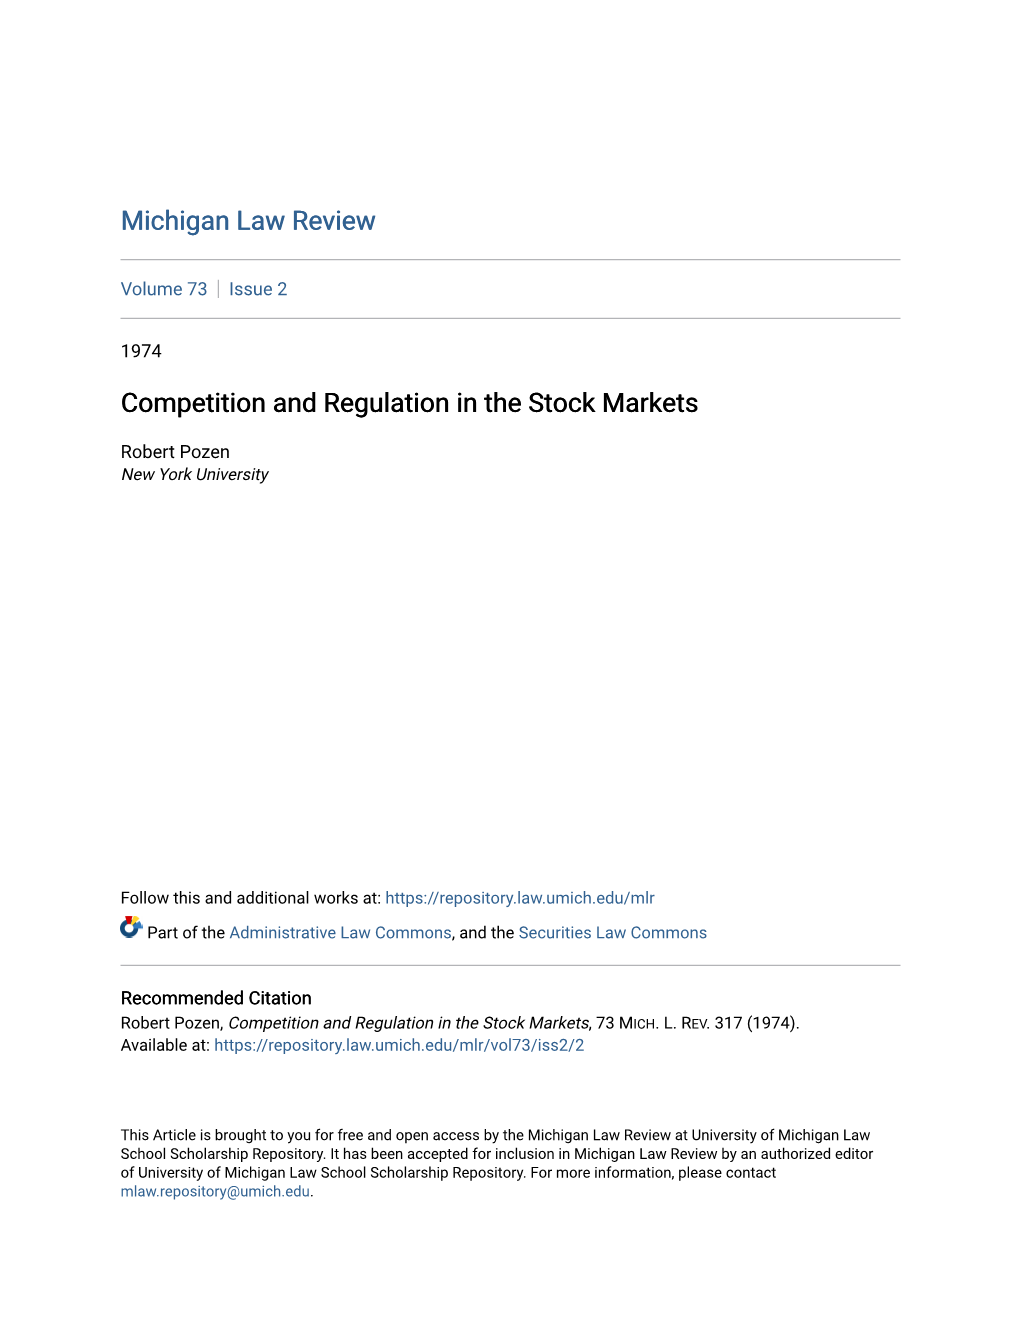 Competition and Regulation in the Stock Markets